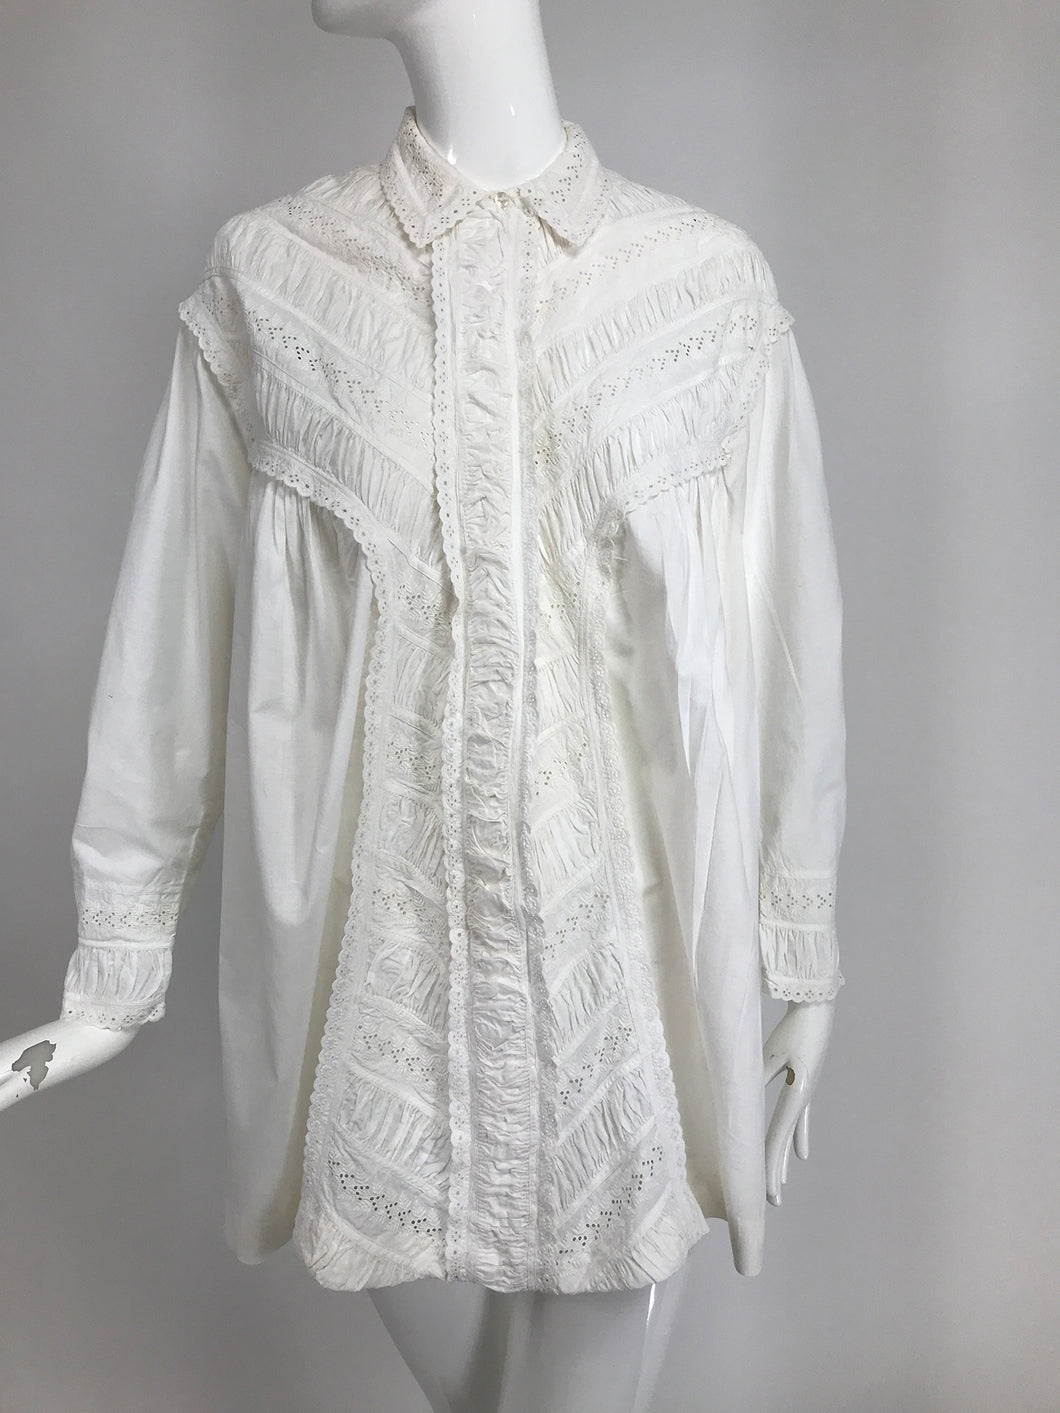 SOLD Victorian White Cotton Ruched Broderie Anglaise Eyelet Bed